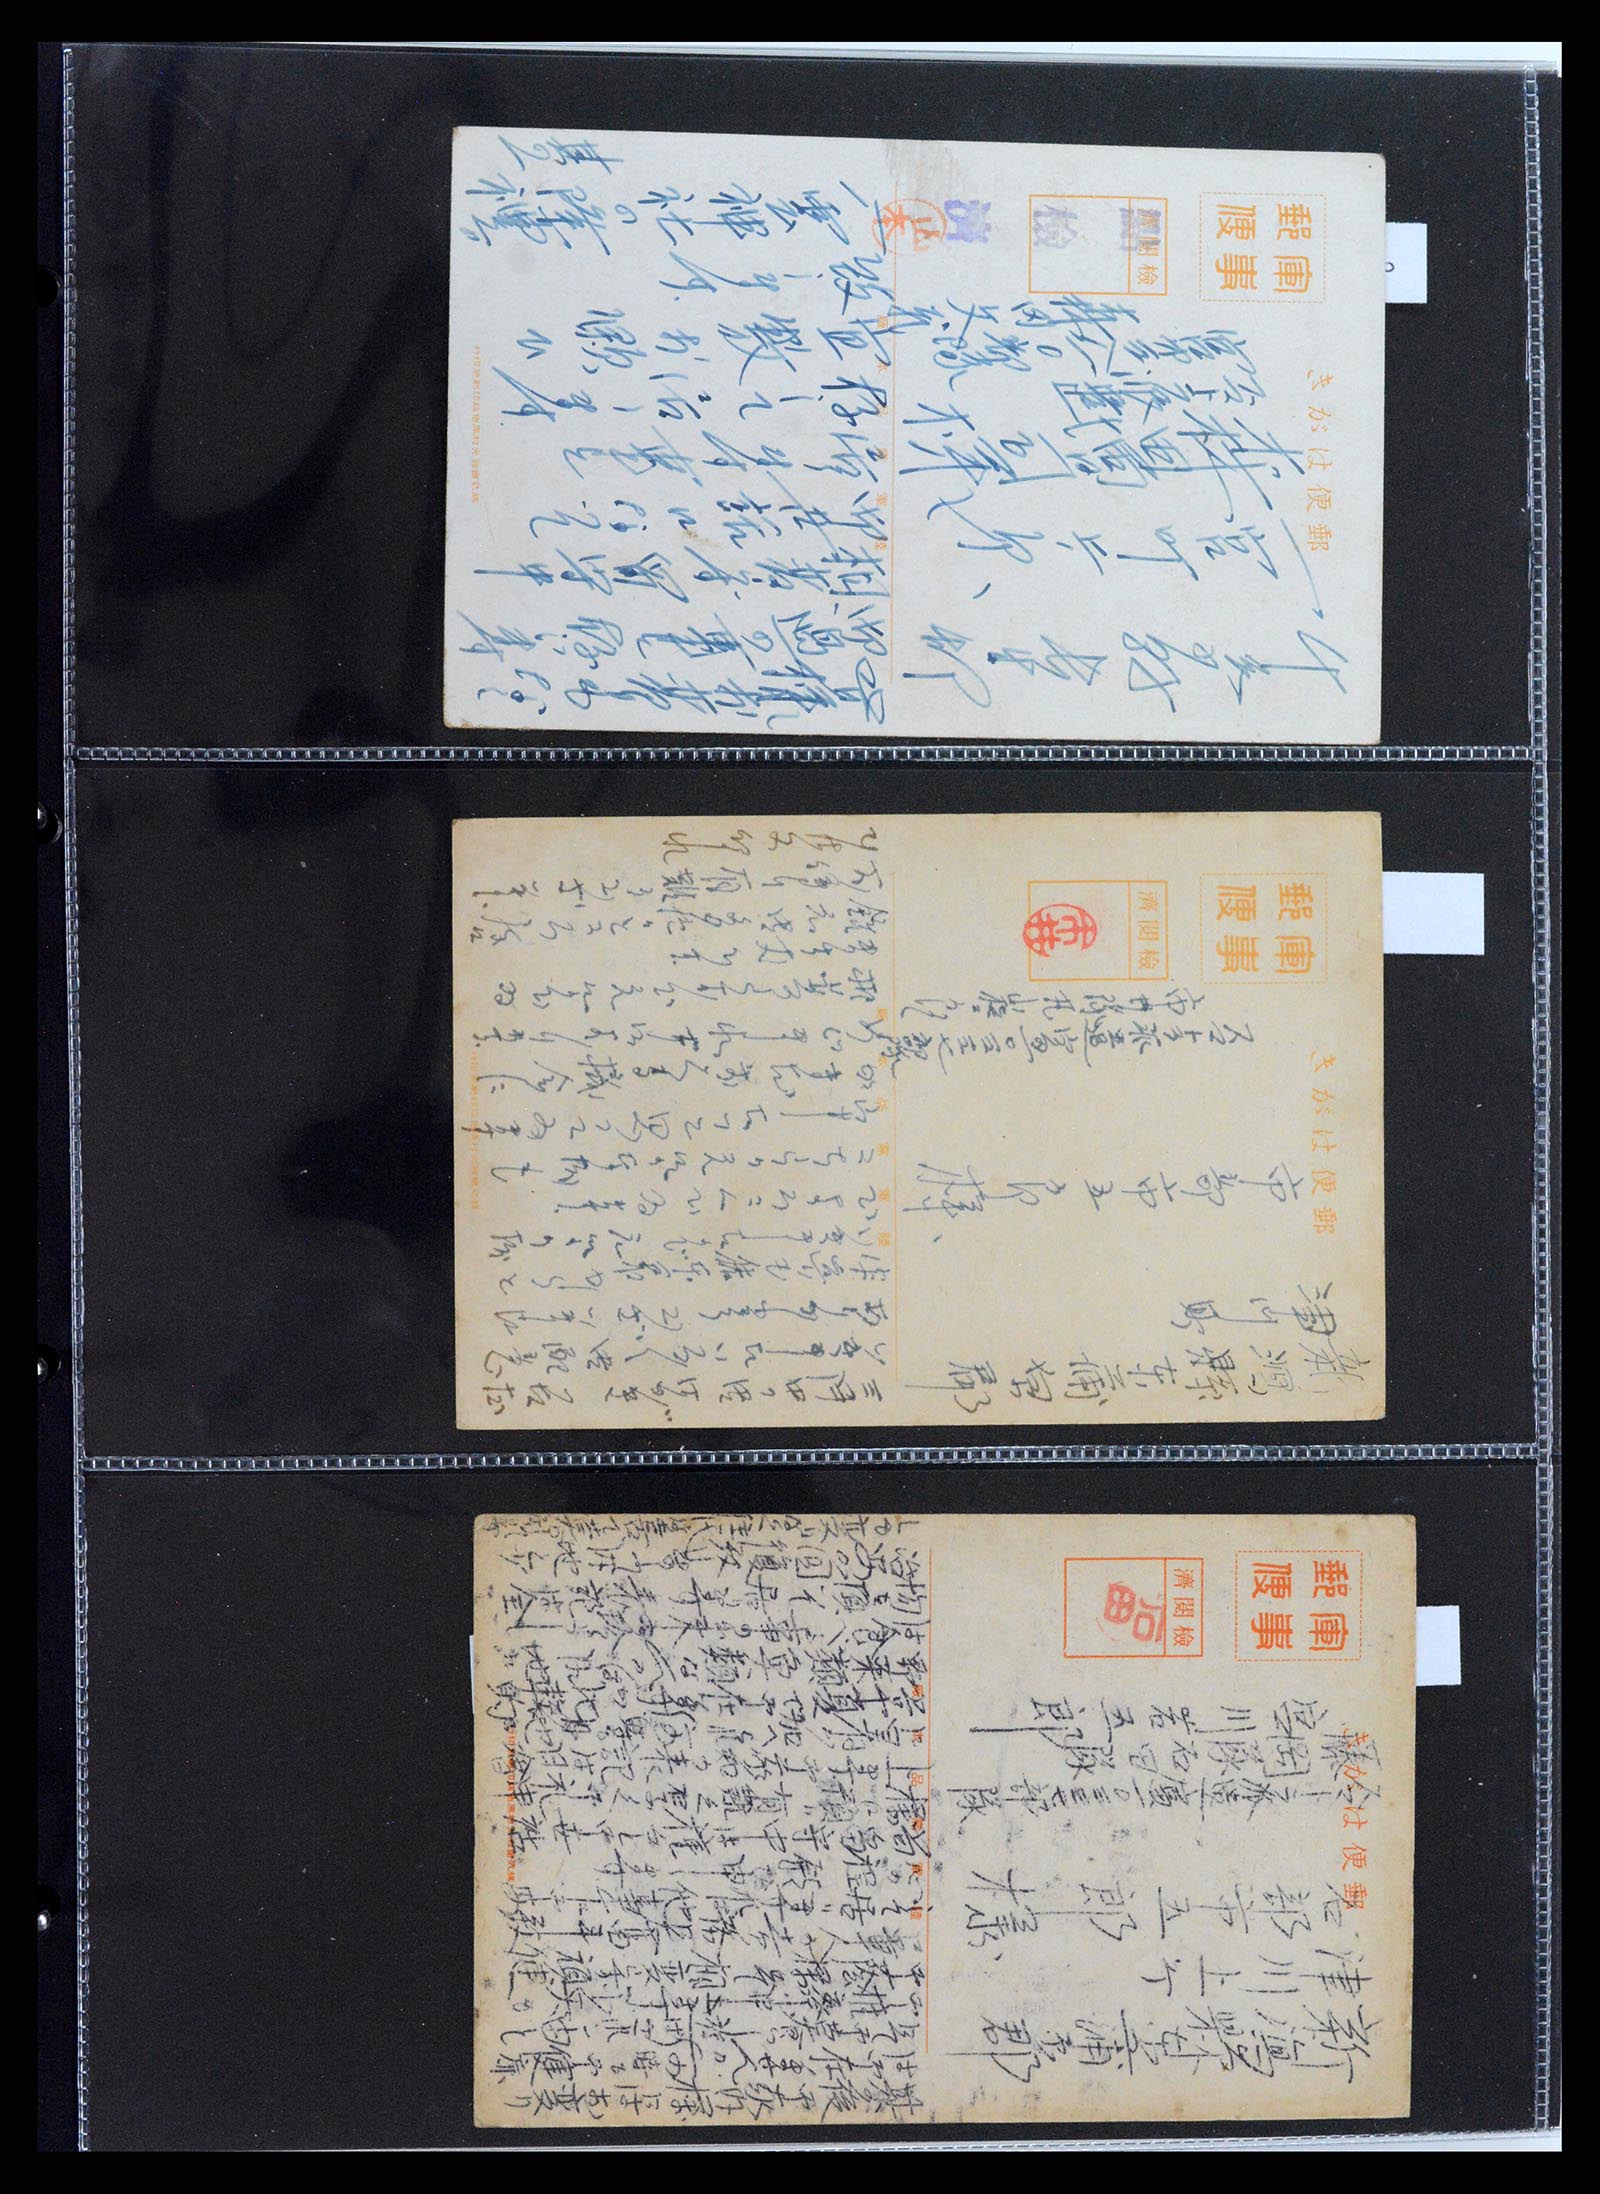 37423 035 - Stamp collection 37423 Dutch Indies Japanese occupation covers 1942-1945